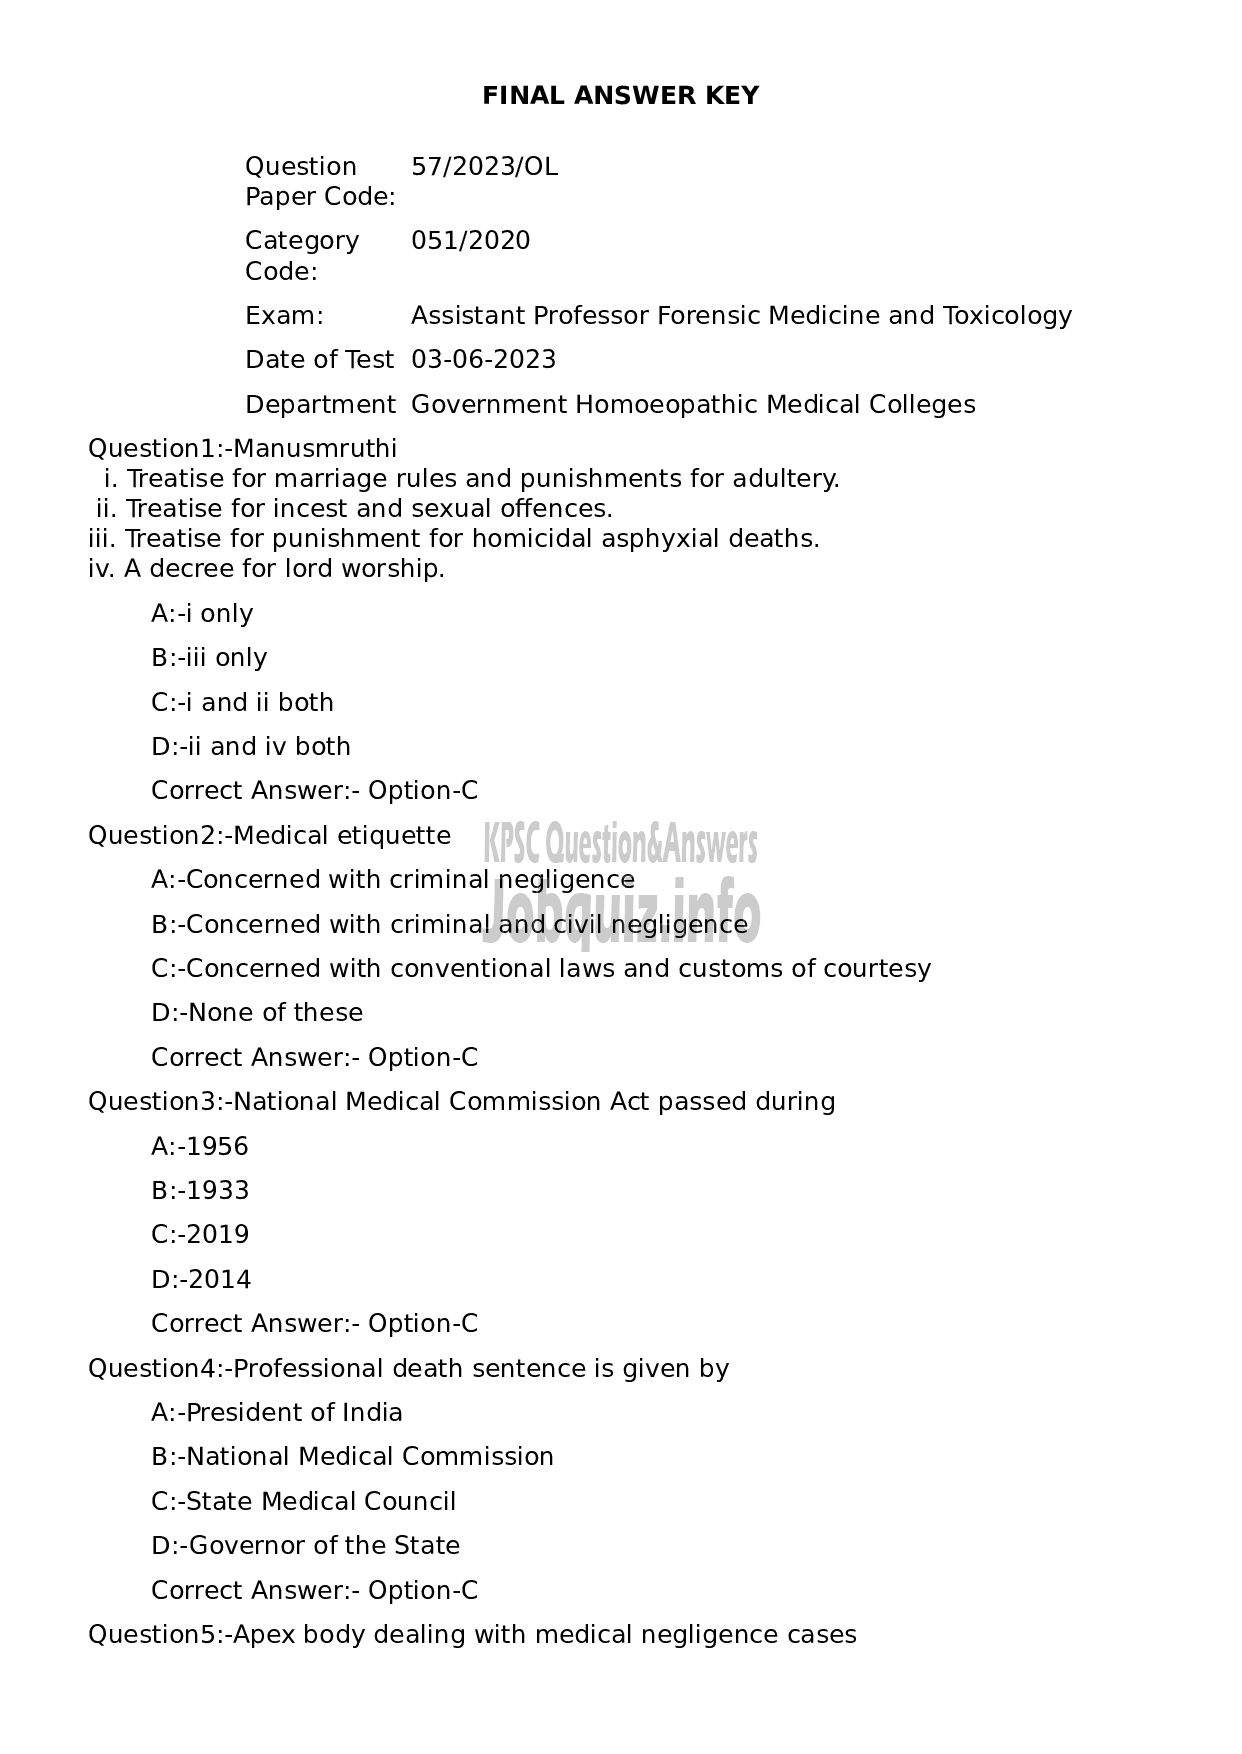 Kerala PSC Question Paper - Assistant Professor Forensic Medicine and Toxicology-1